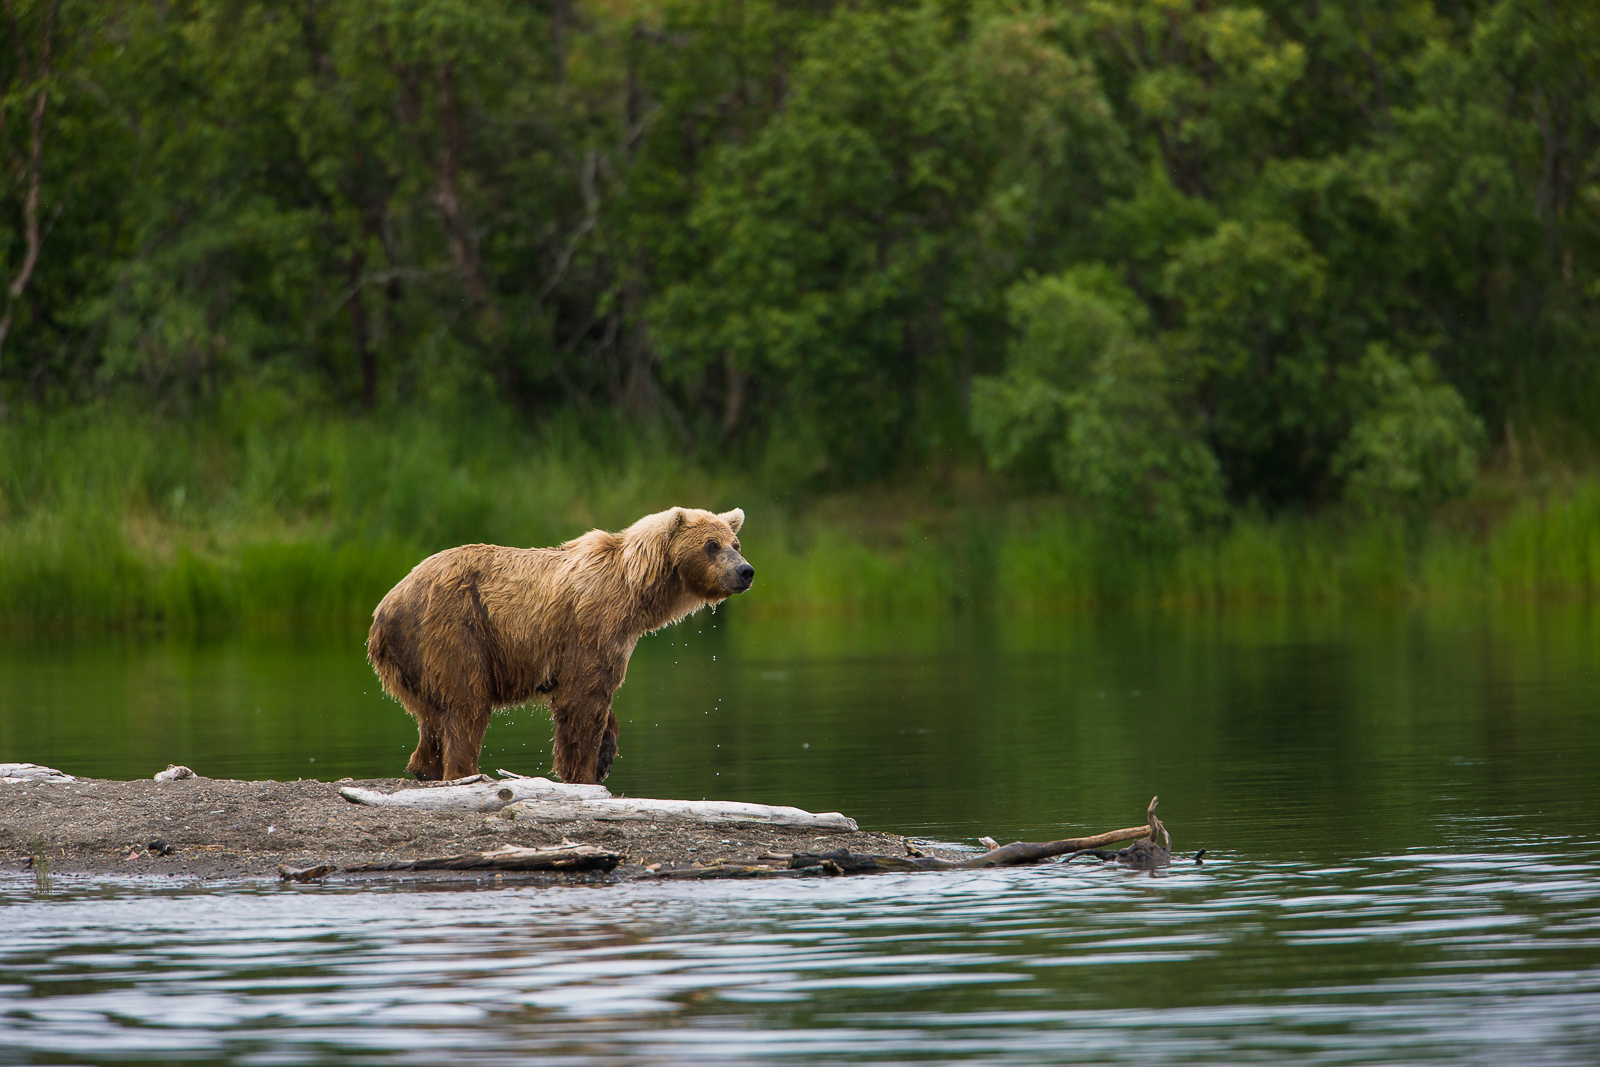 Upon the peninsula this bear searches for salmon that swim to close to the shores for their own good.